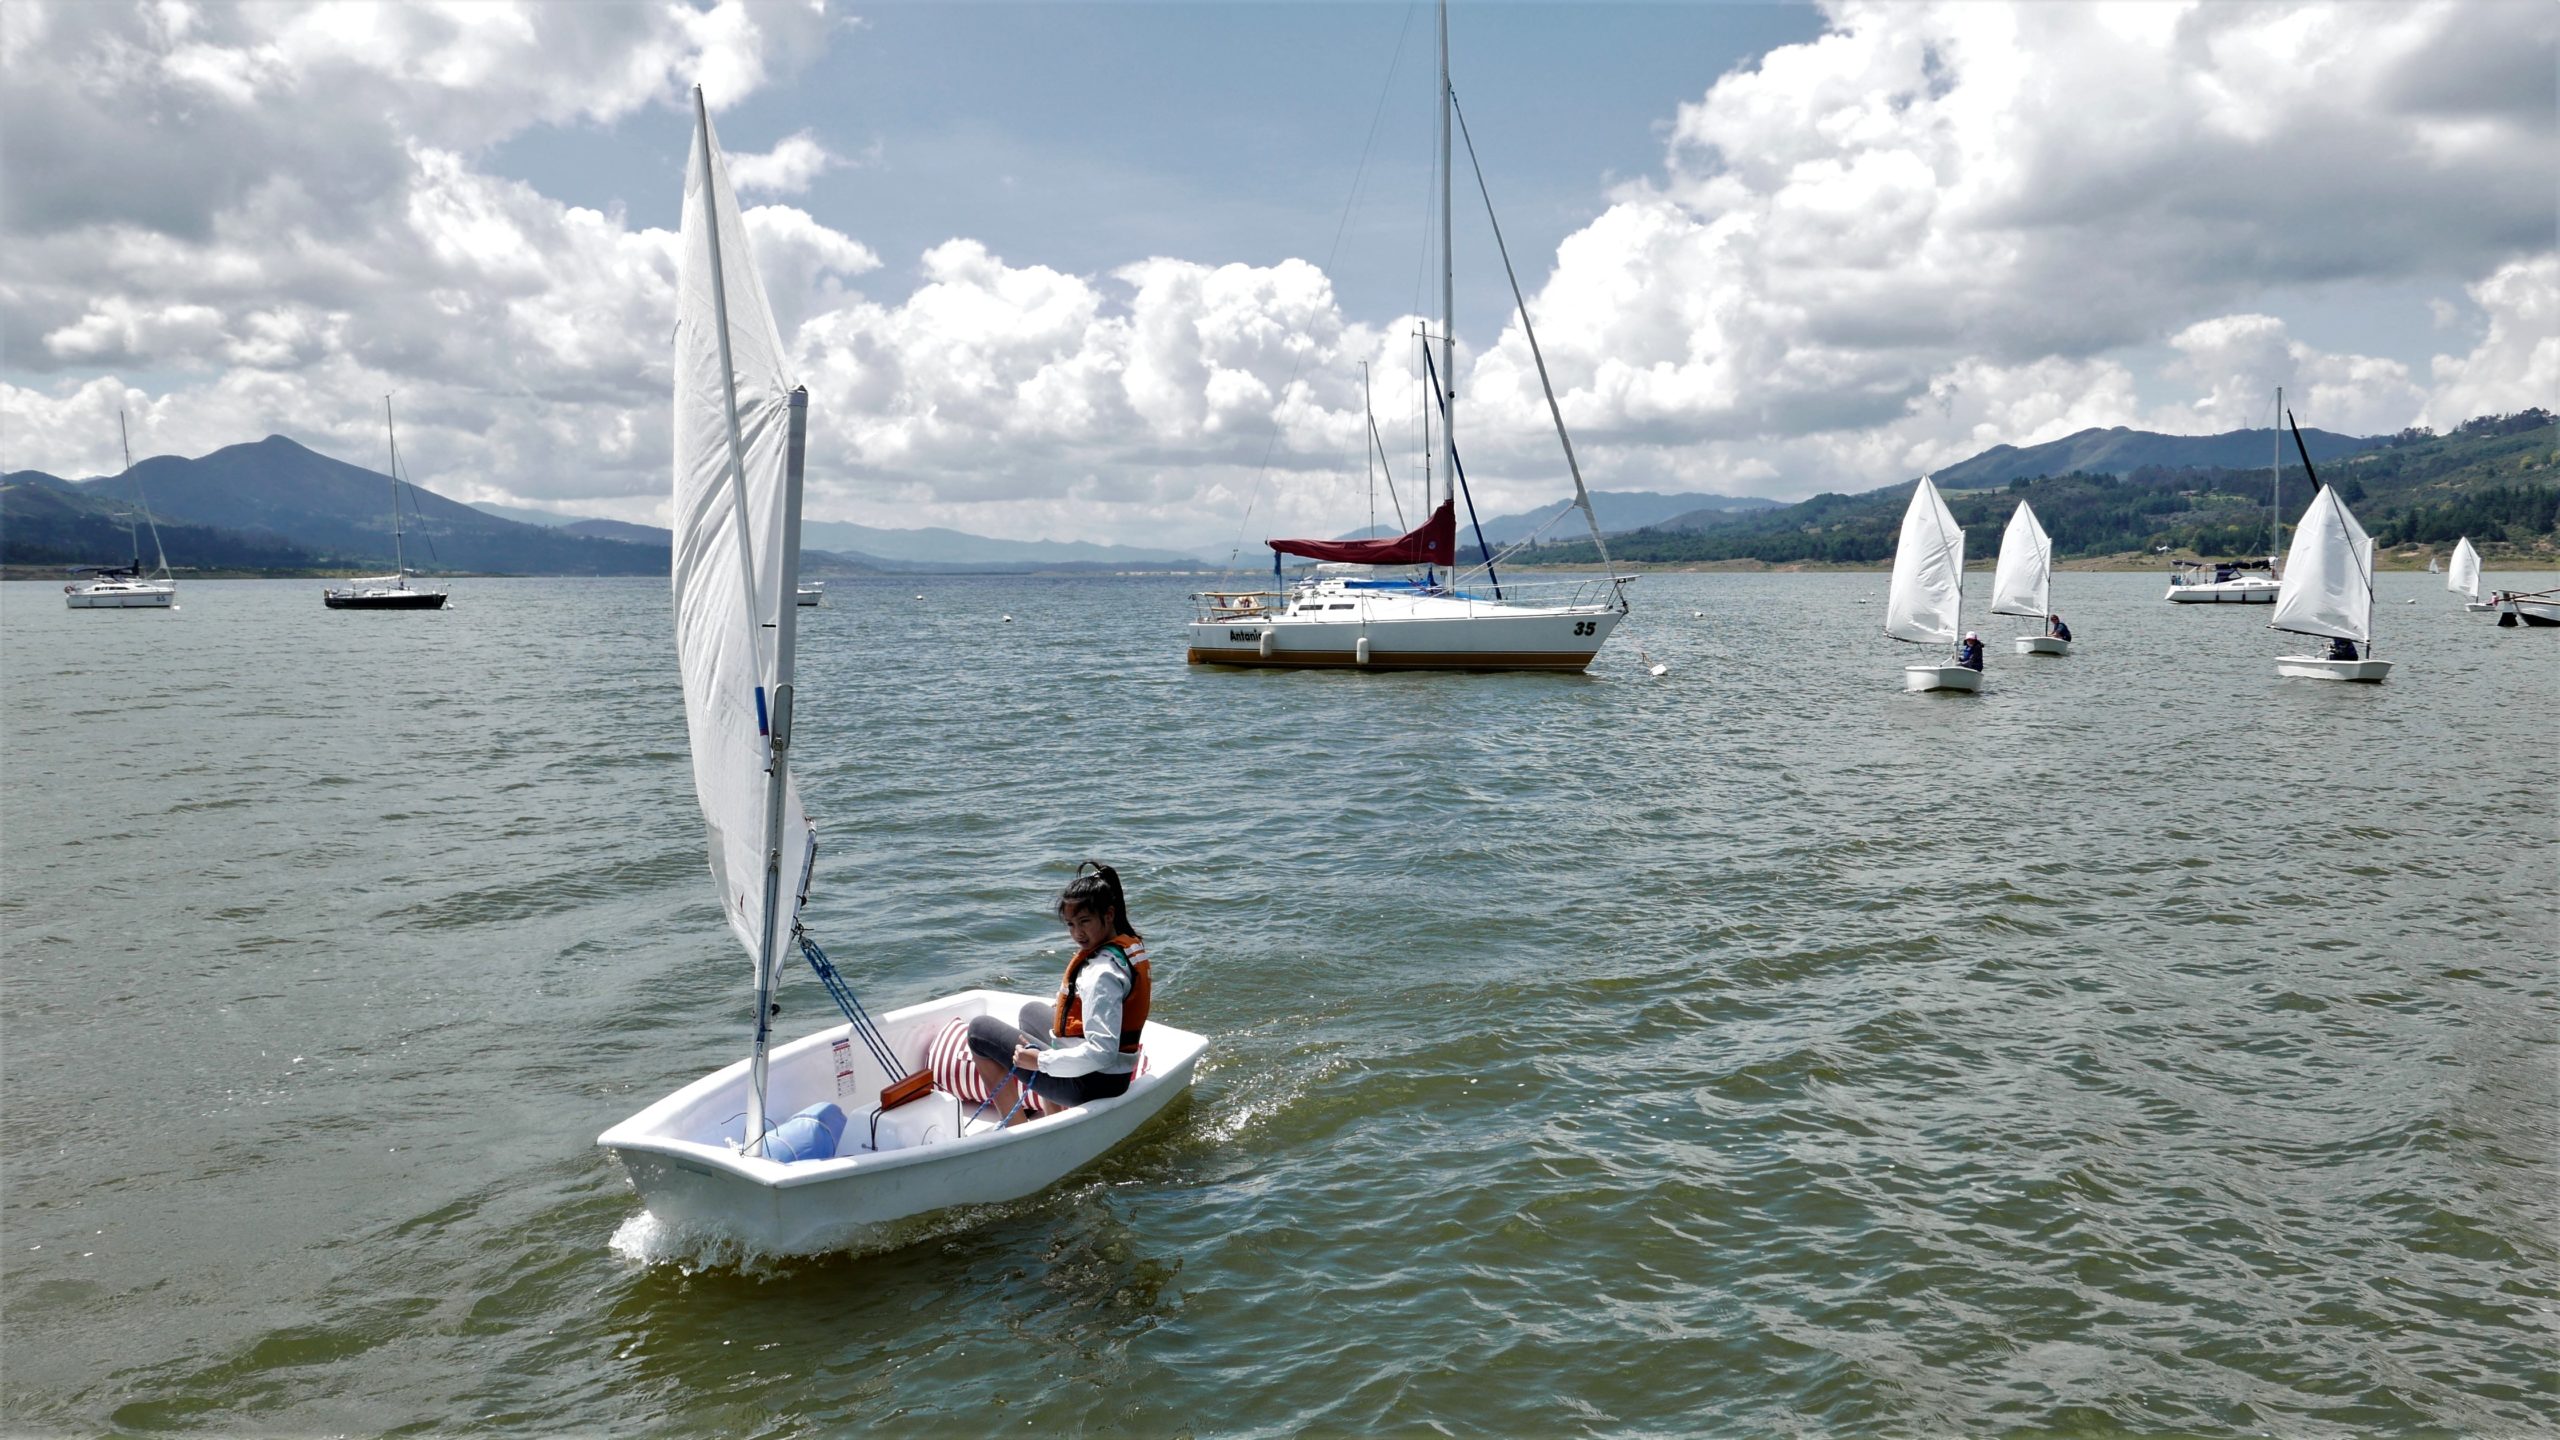 he Club Nautica Muña runs sailing classes on weekends, with Optimus dinghies for kids up to 12 years, and Sunfish for 